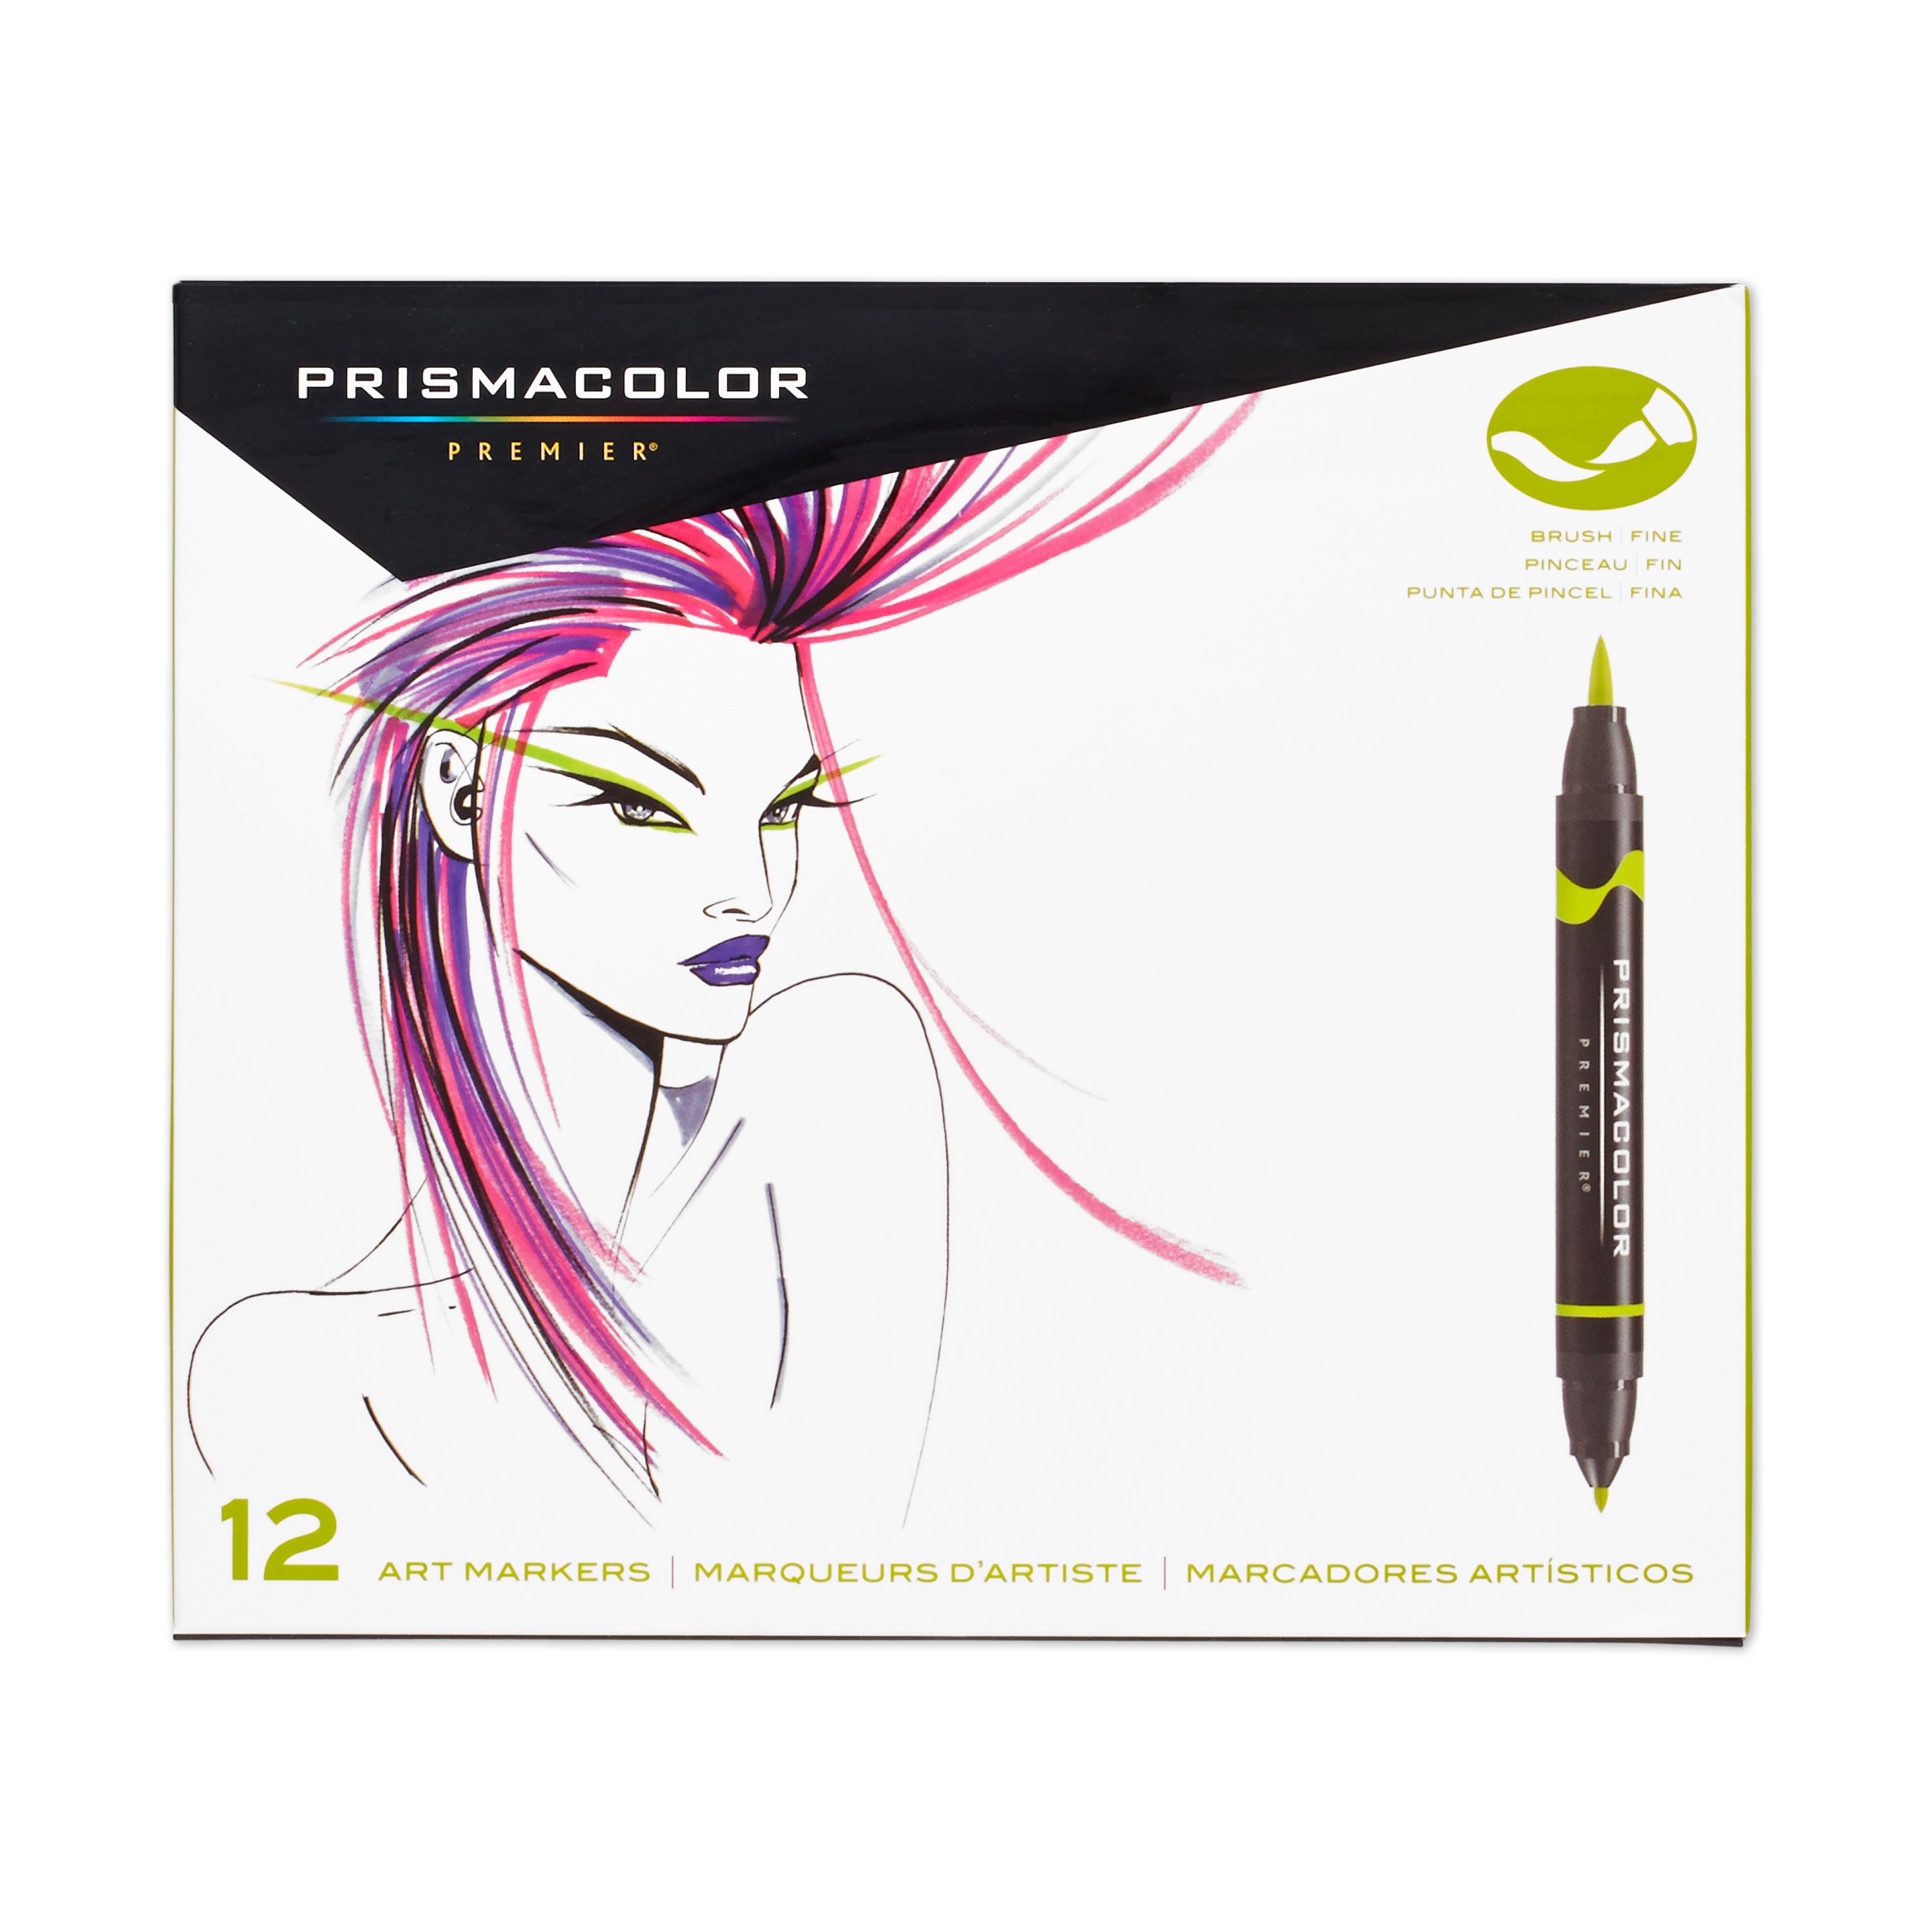 https://s7d9.scene7.com/is/image//NewellRubbermaid/1773297-prismacolor-markers-premierbrush-package-front-1